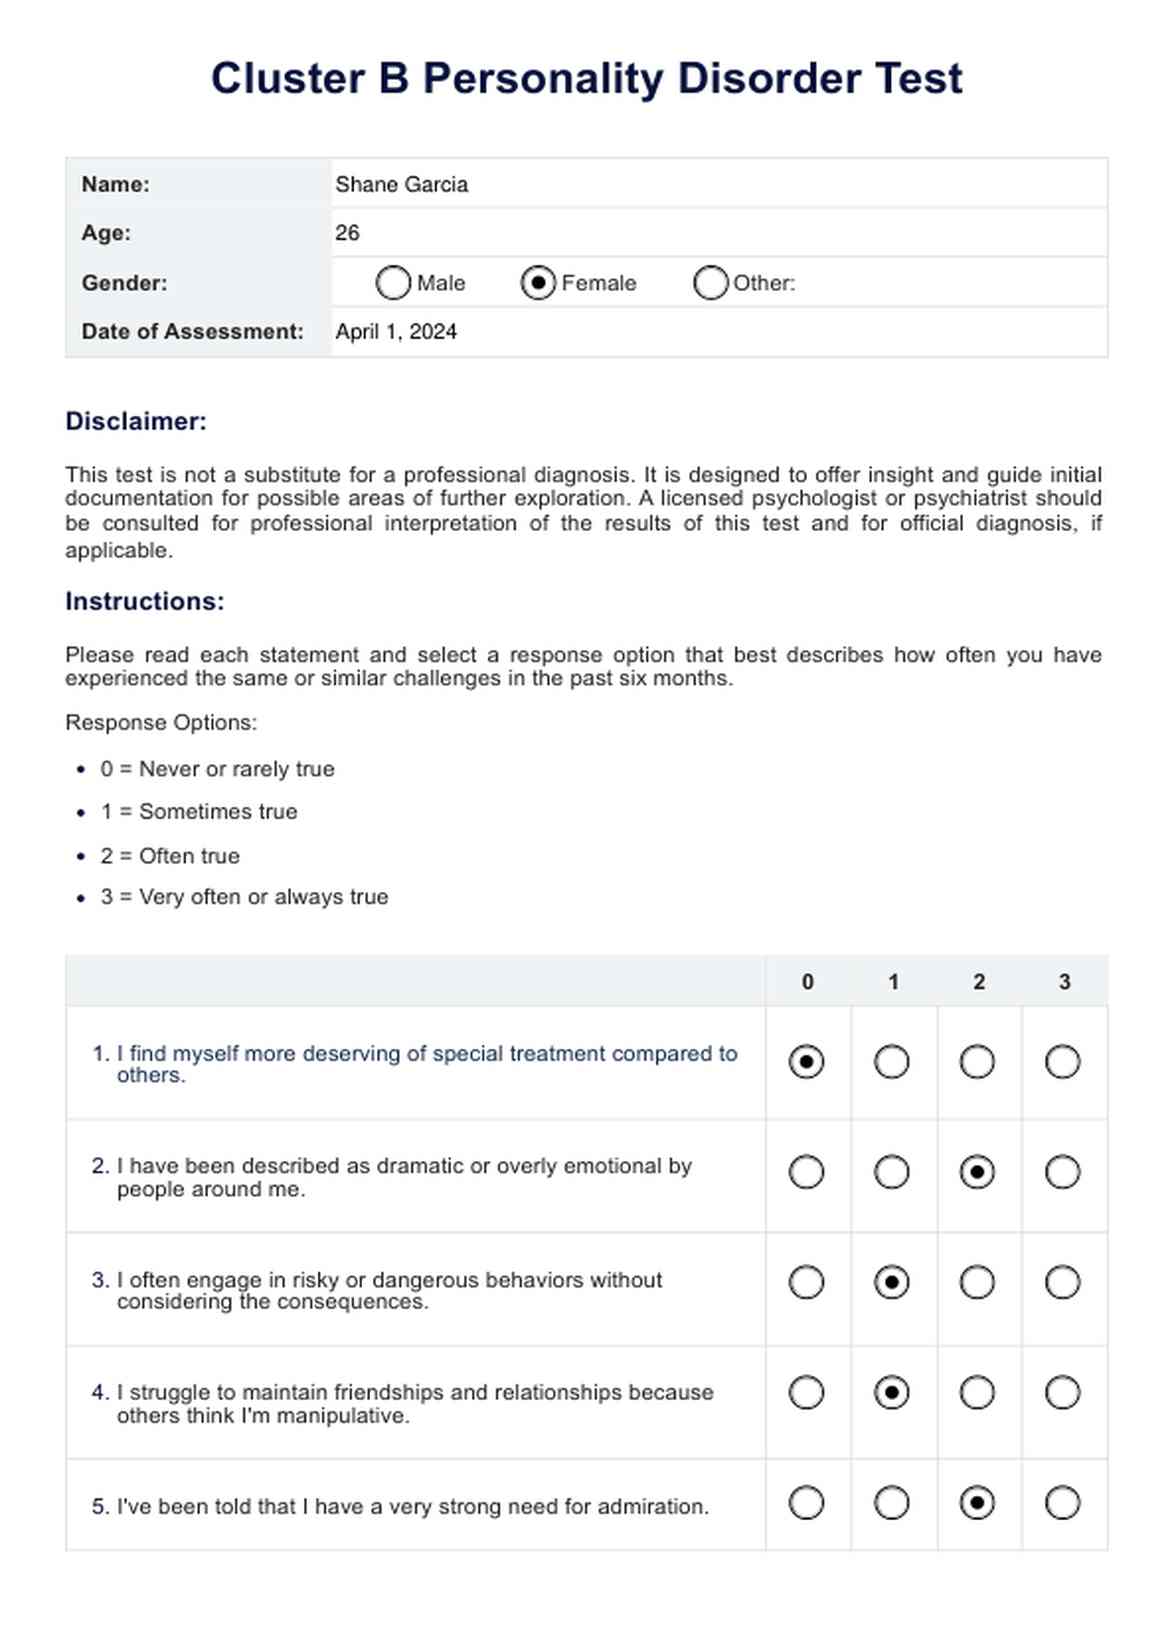 Cluster B Personality Disorder Test PDF Example